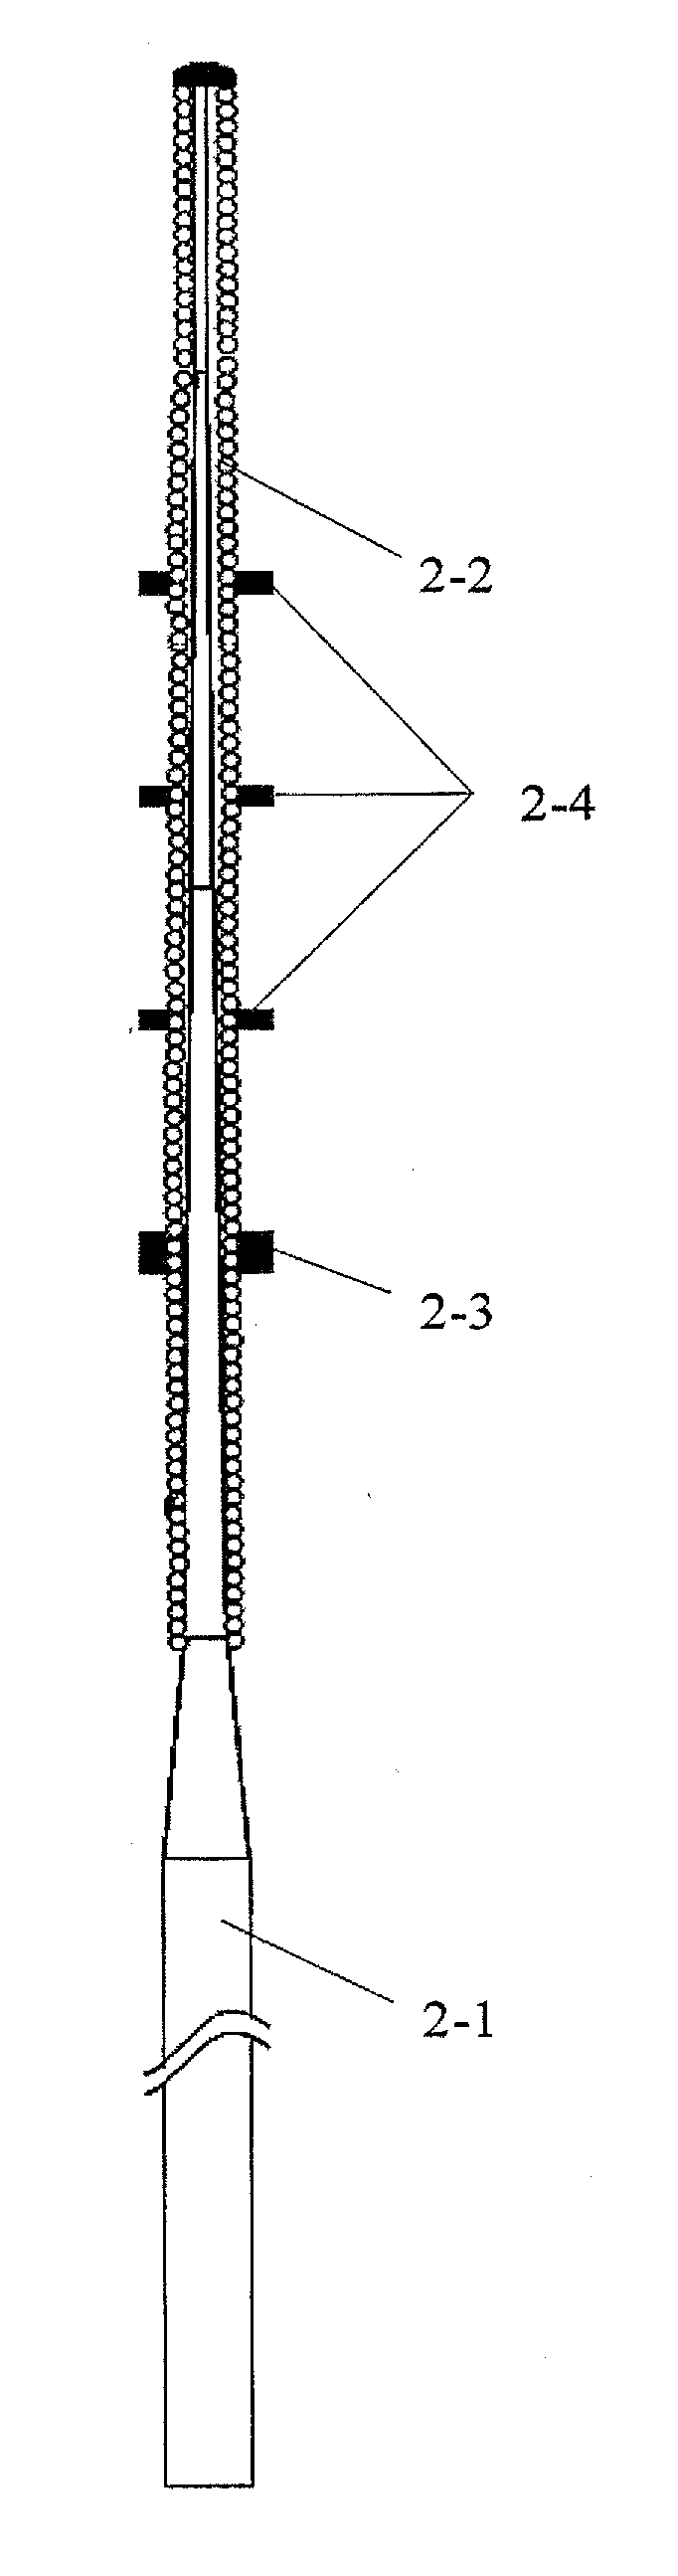 Surgical apparatus for aneurysms